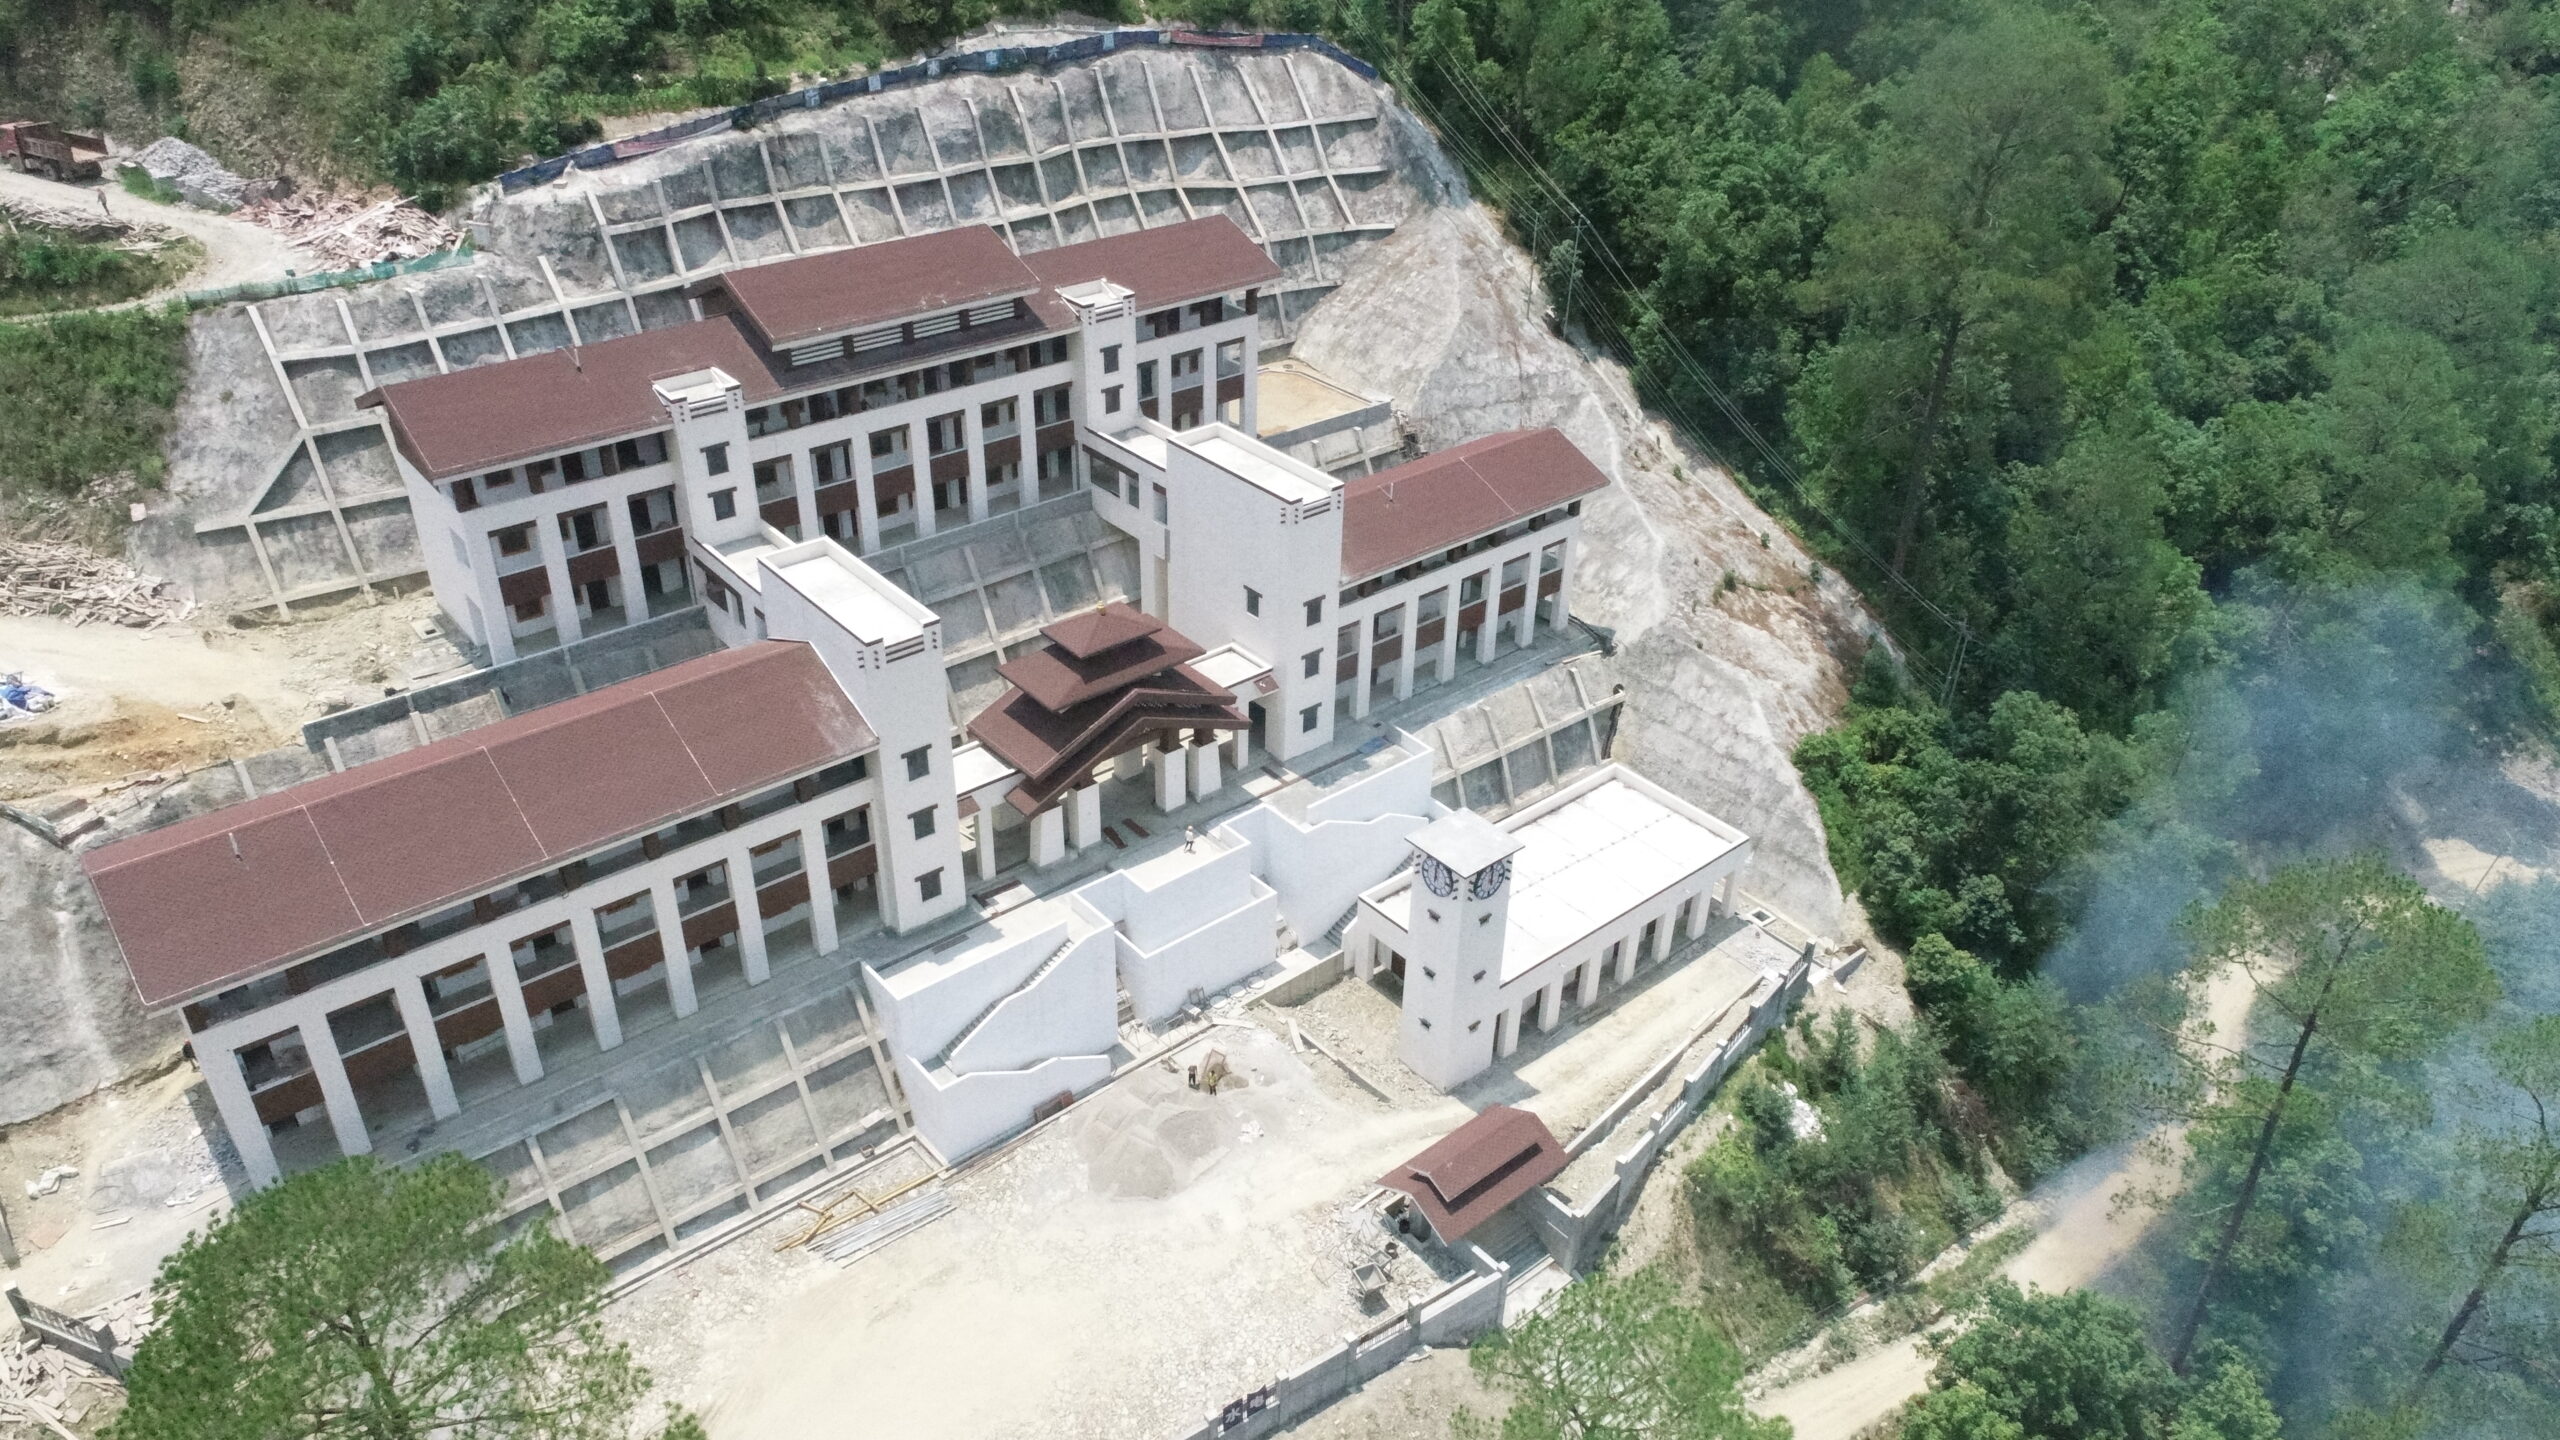 China Aid constructs two school buildings in Dolakha